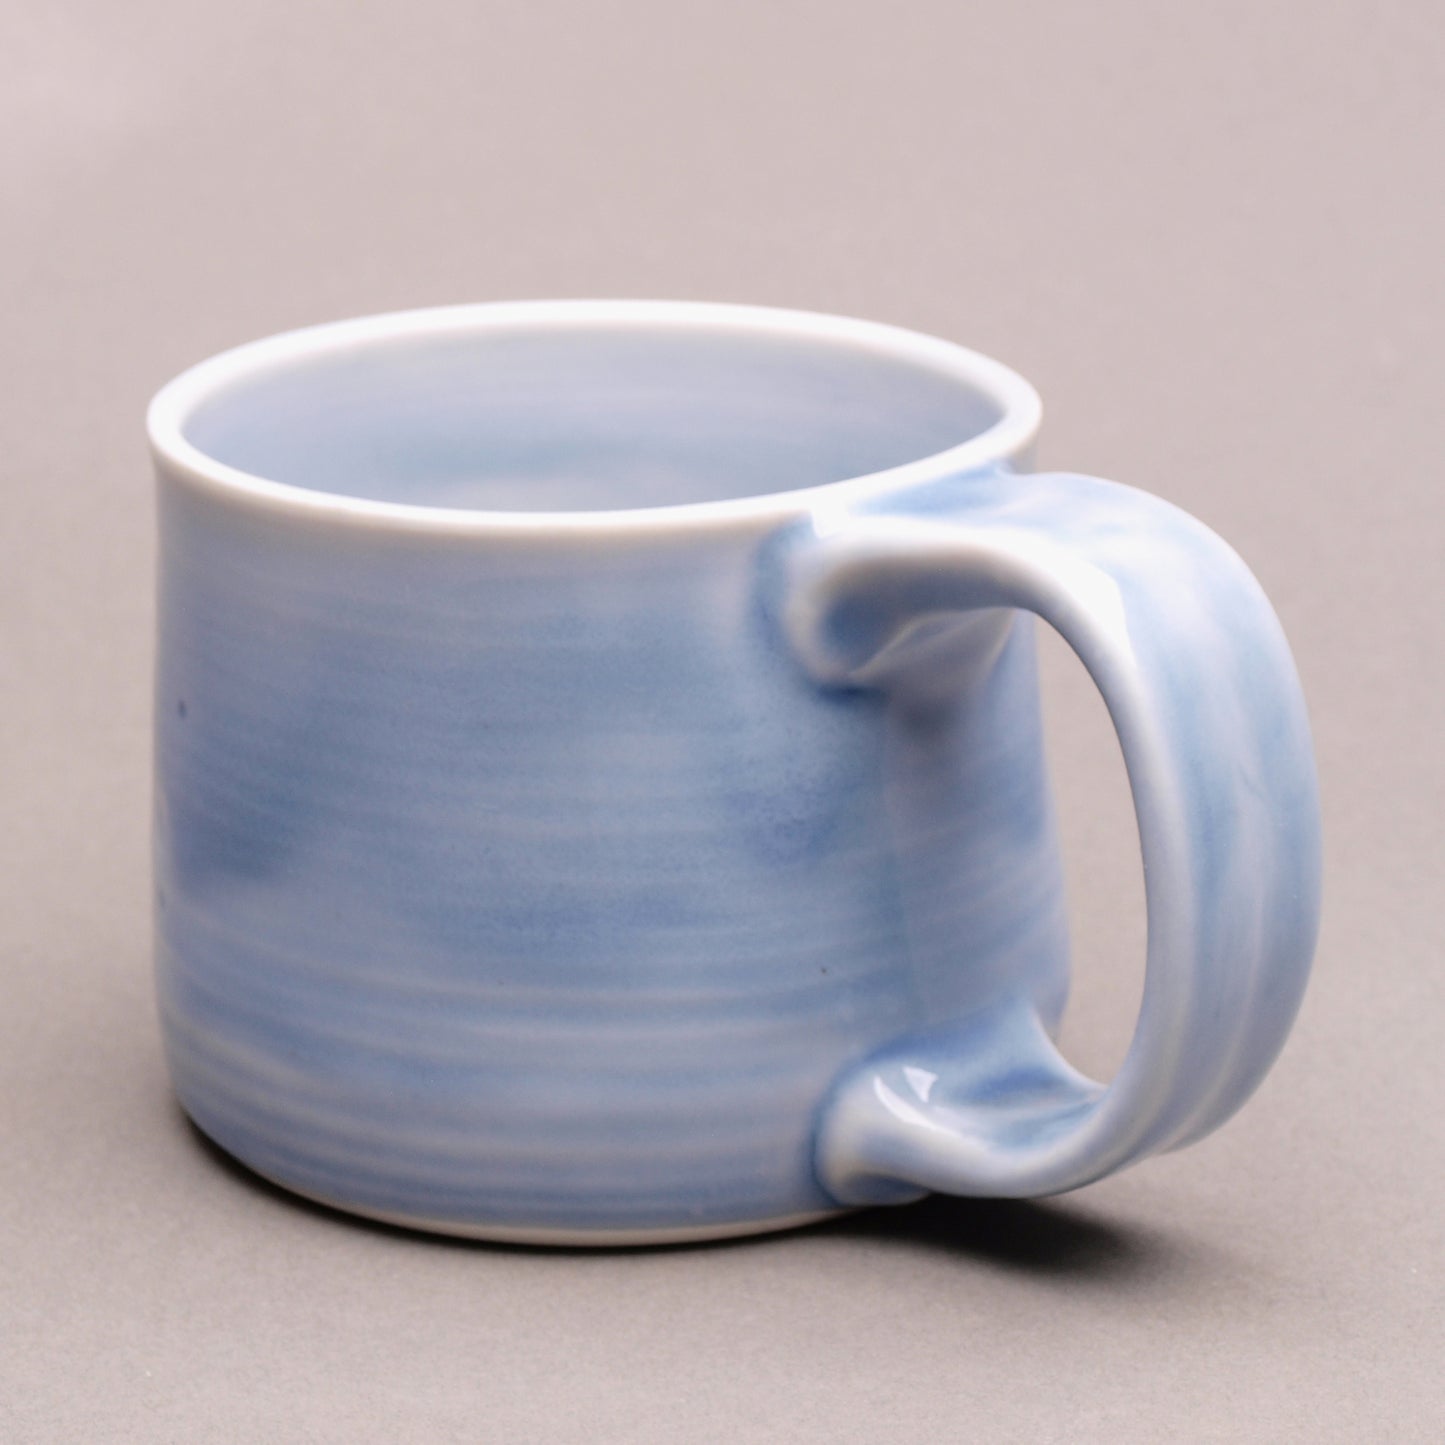 Handcrafted 'PARK CITY' Souvenir Mug by Mike Hays: Artistry, Comfort, and Durability MUG #5